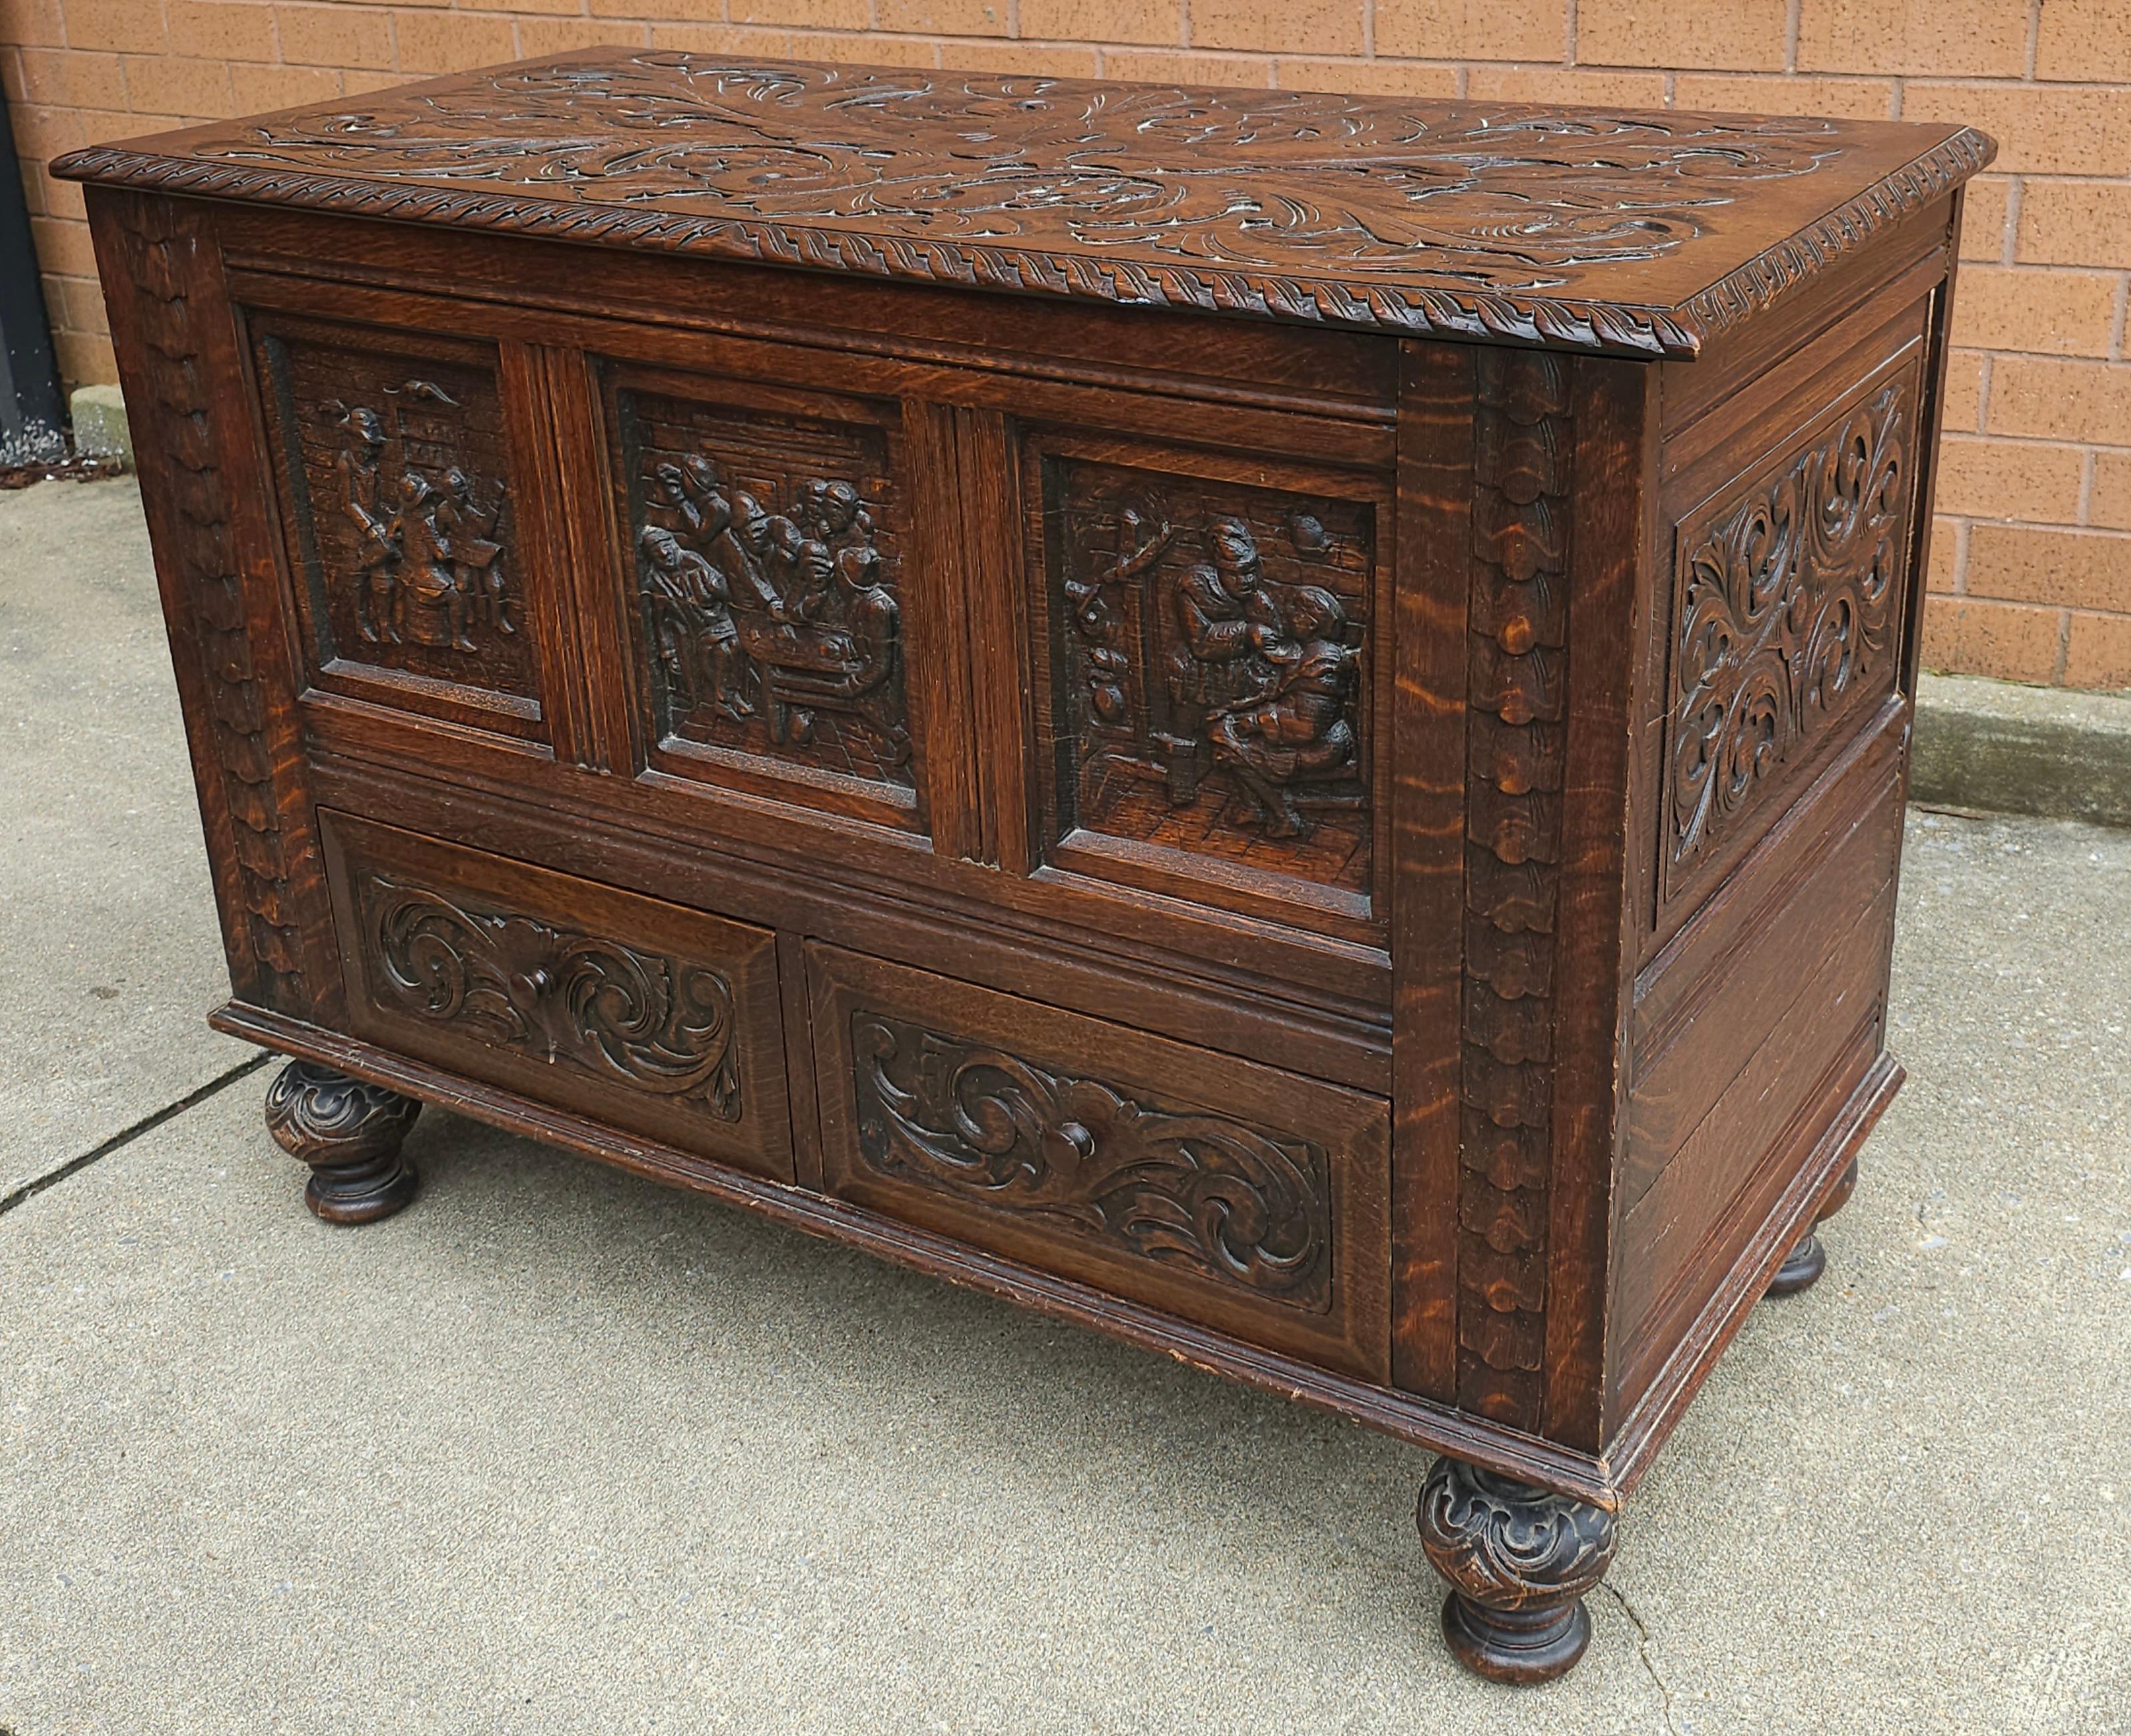 An Early 20th Century Elizabethan Style Hand-Carved Oak Storage / Blanket Chest. Intricately hand carvings of floral and figural scenes. Measures 42